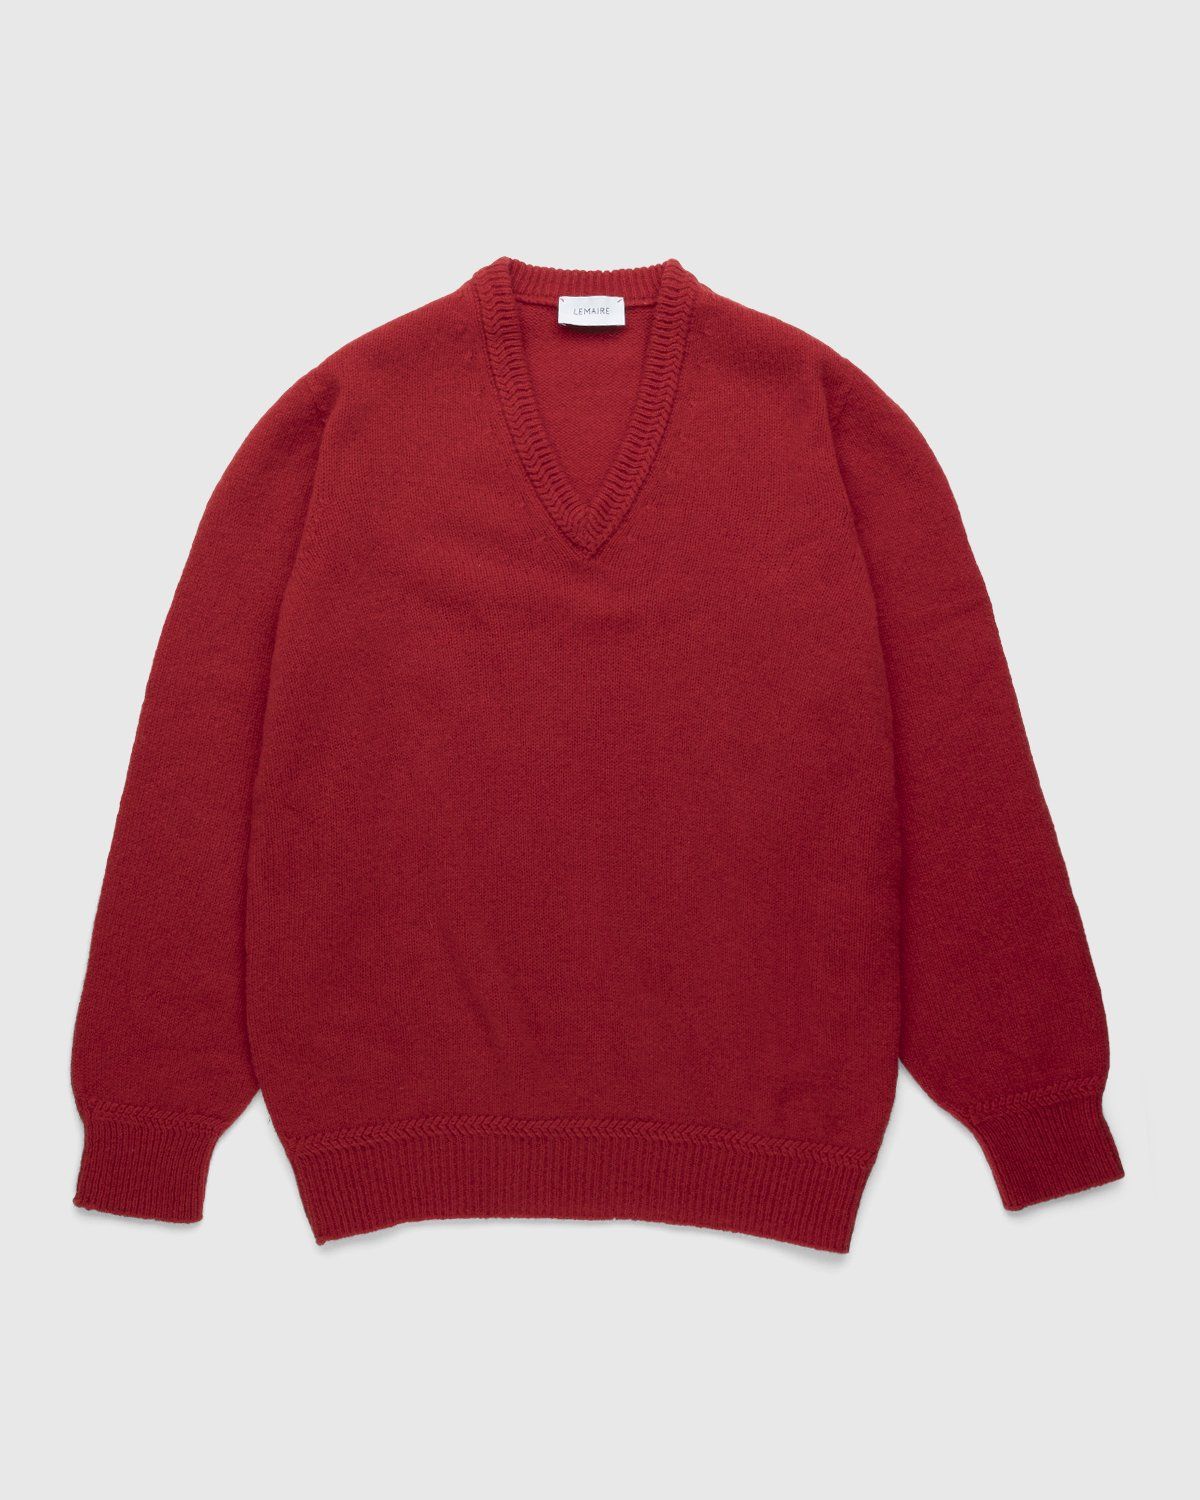 Lemaire – Seamless Shetland Wool V-Neck Sweater Poppy Red - Knitwear - Red - Image 1